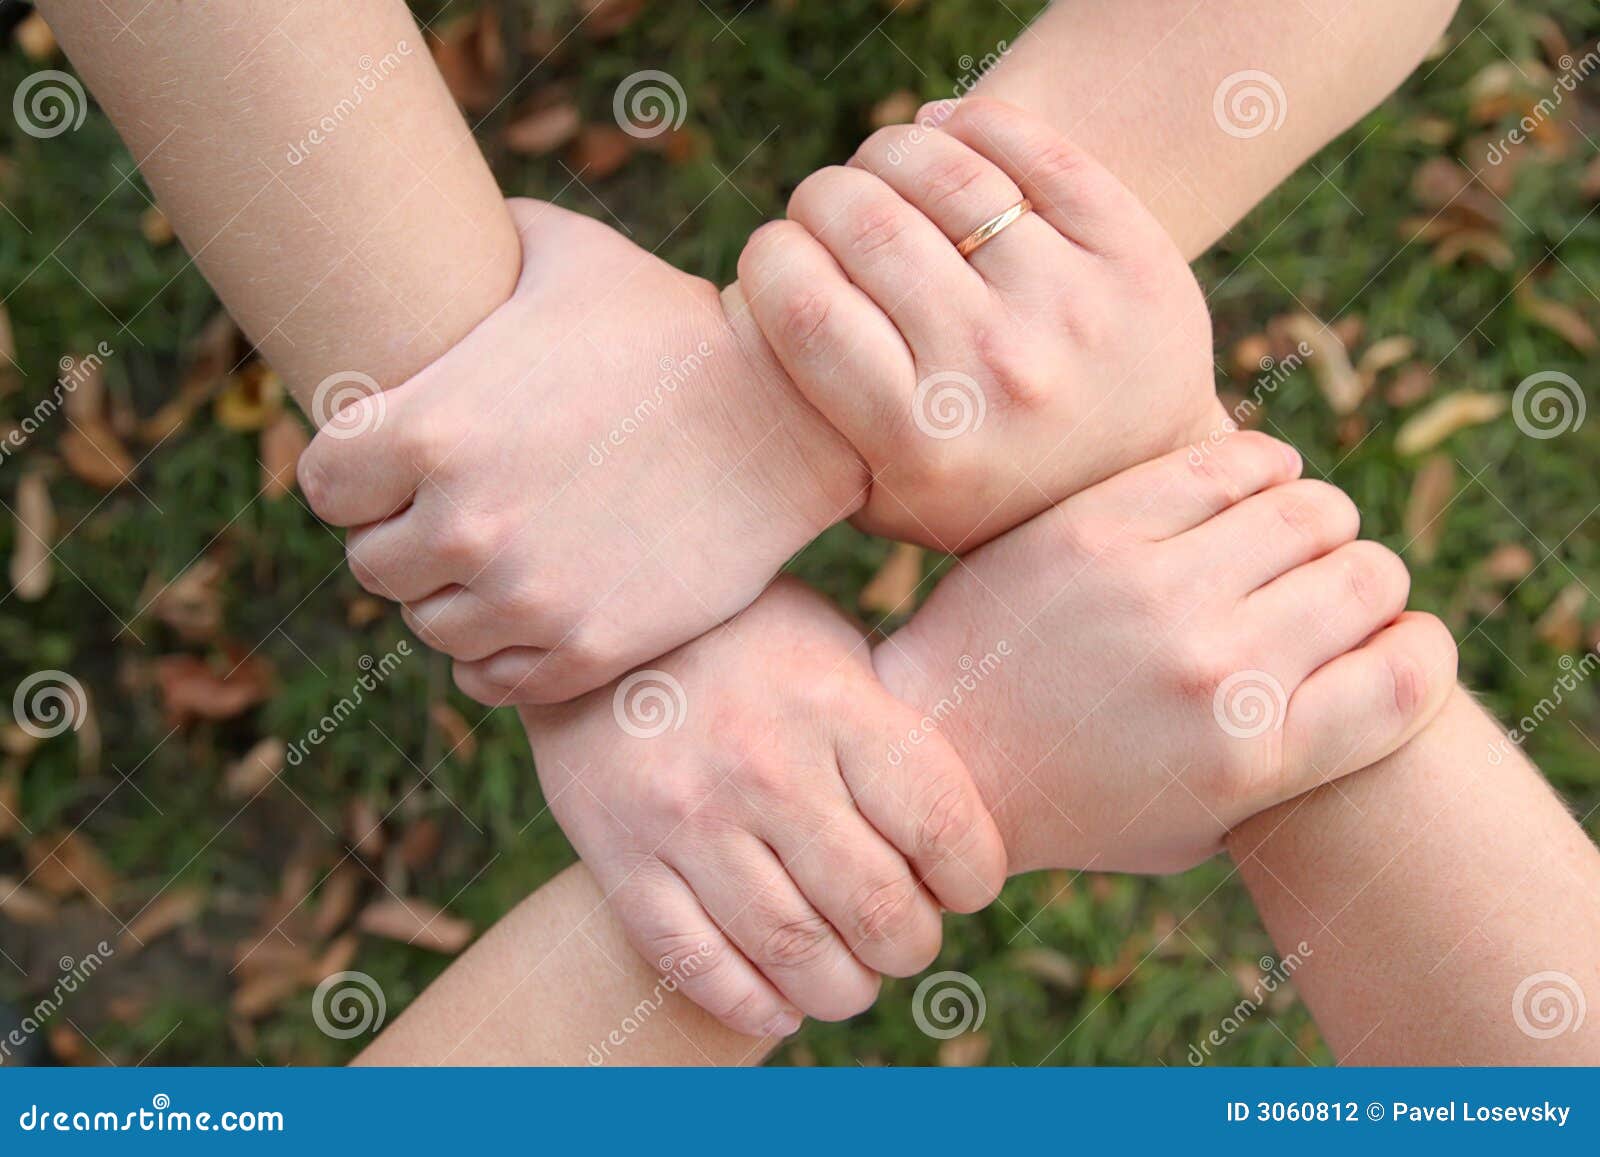 171 Four Hands Holding Each Other Stock Photos - Free & Royalty